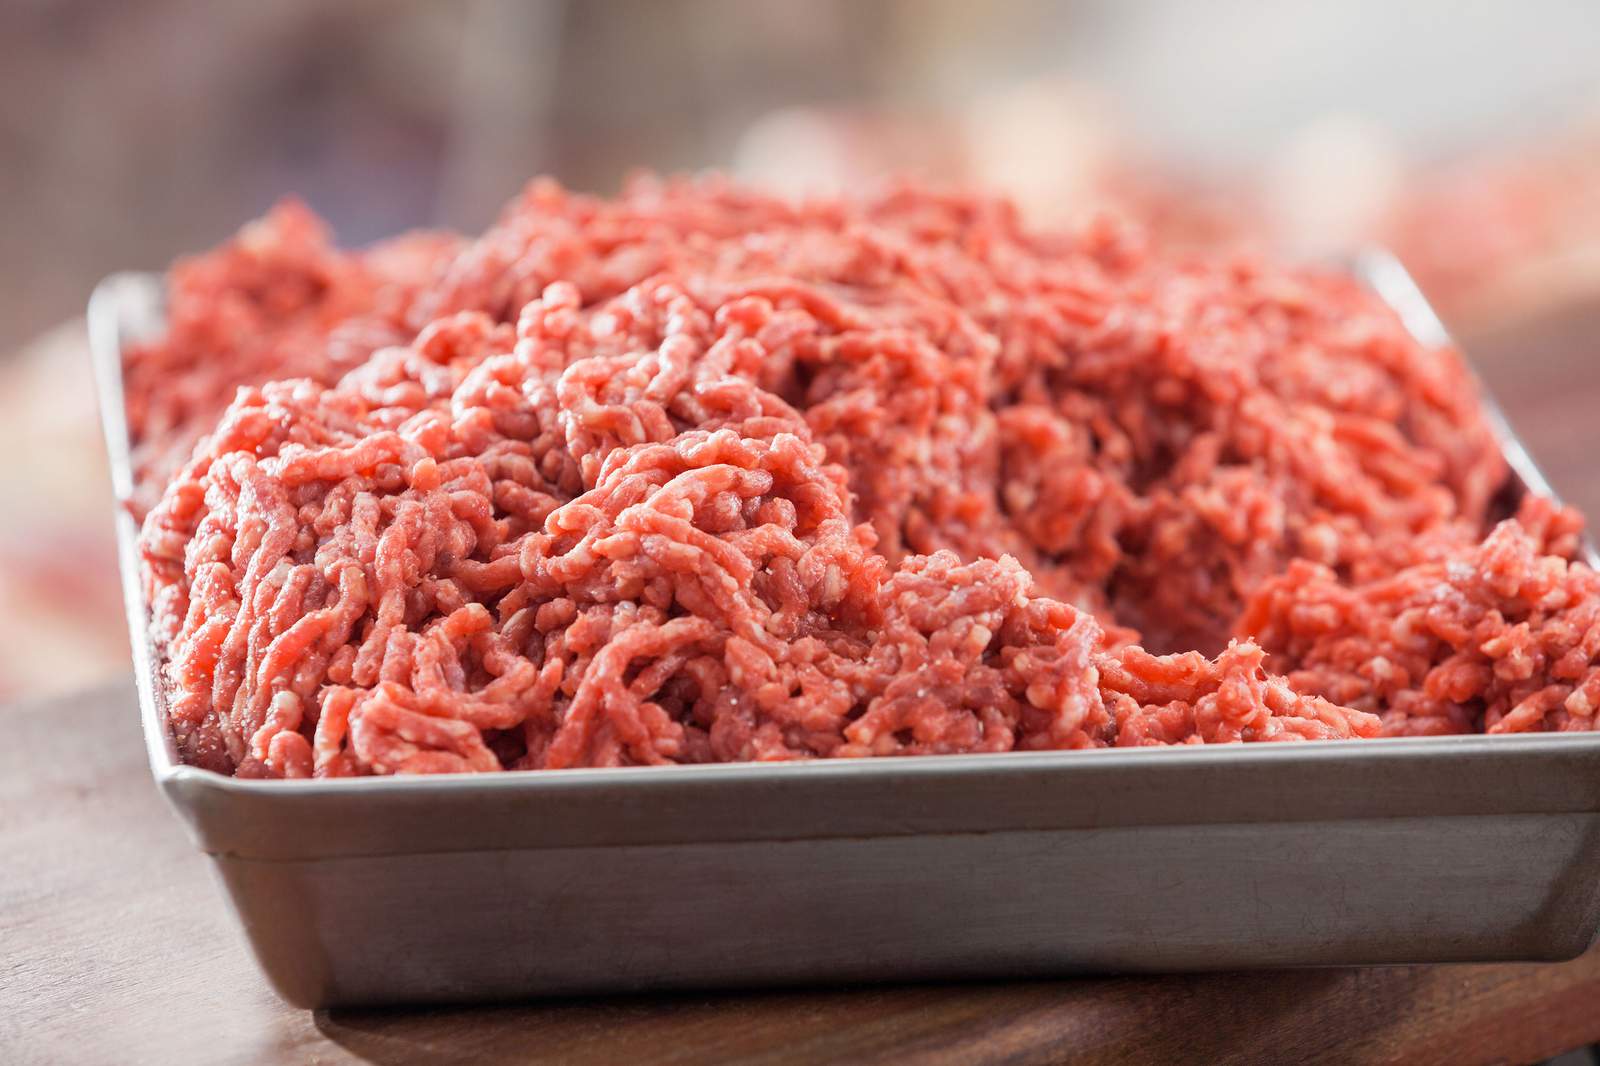 40,000 pounds of ground beef recalled due to E. coli concerns